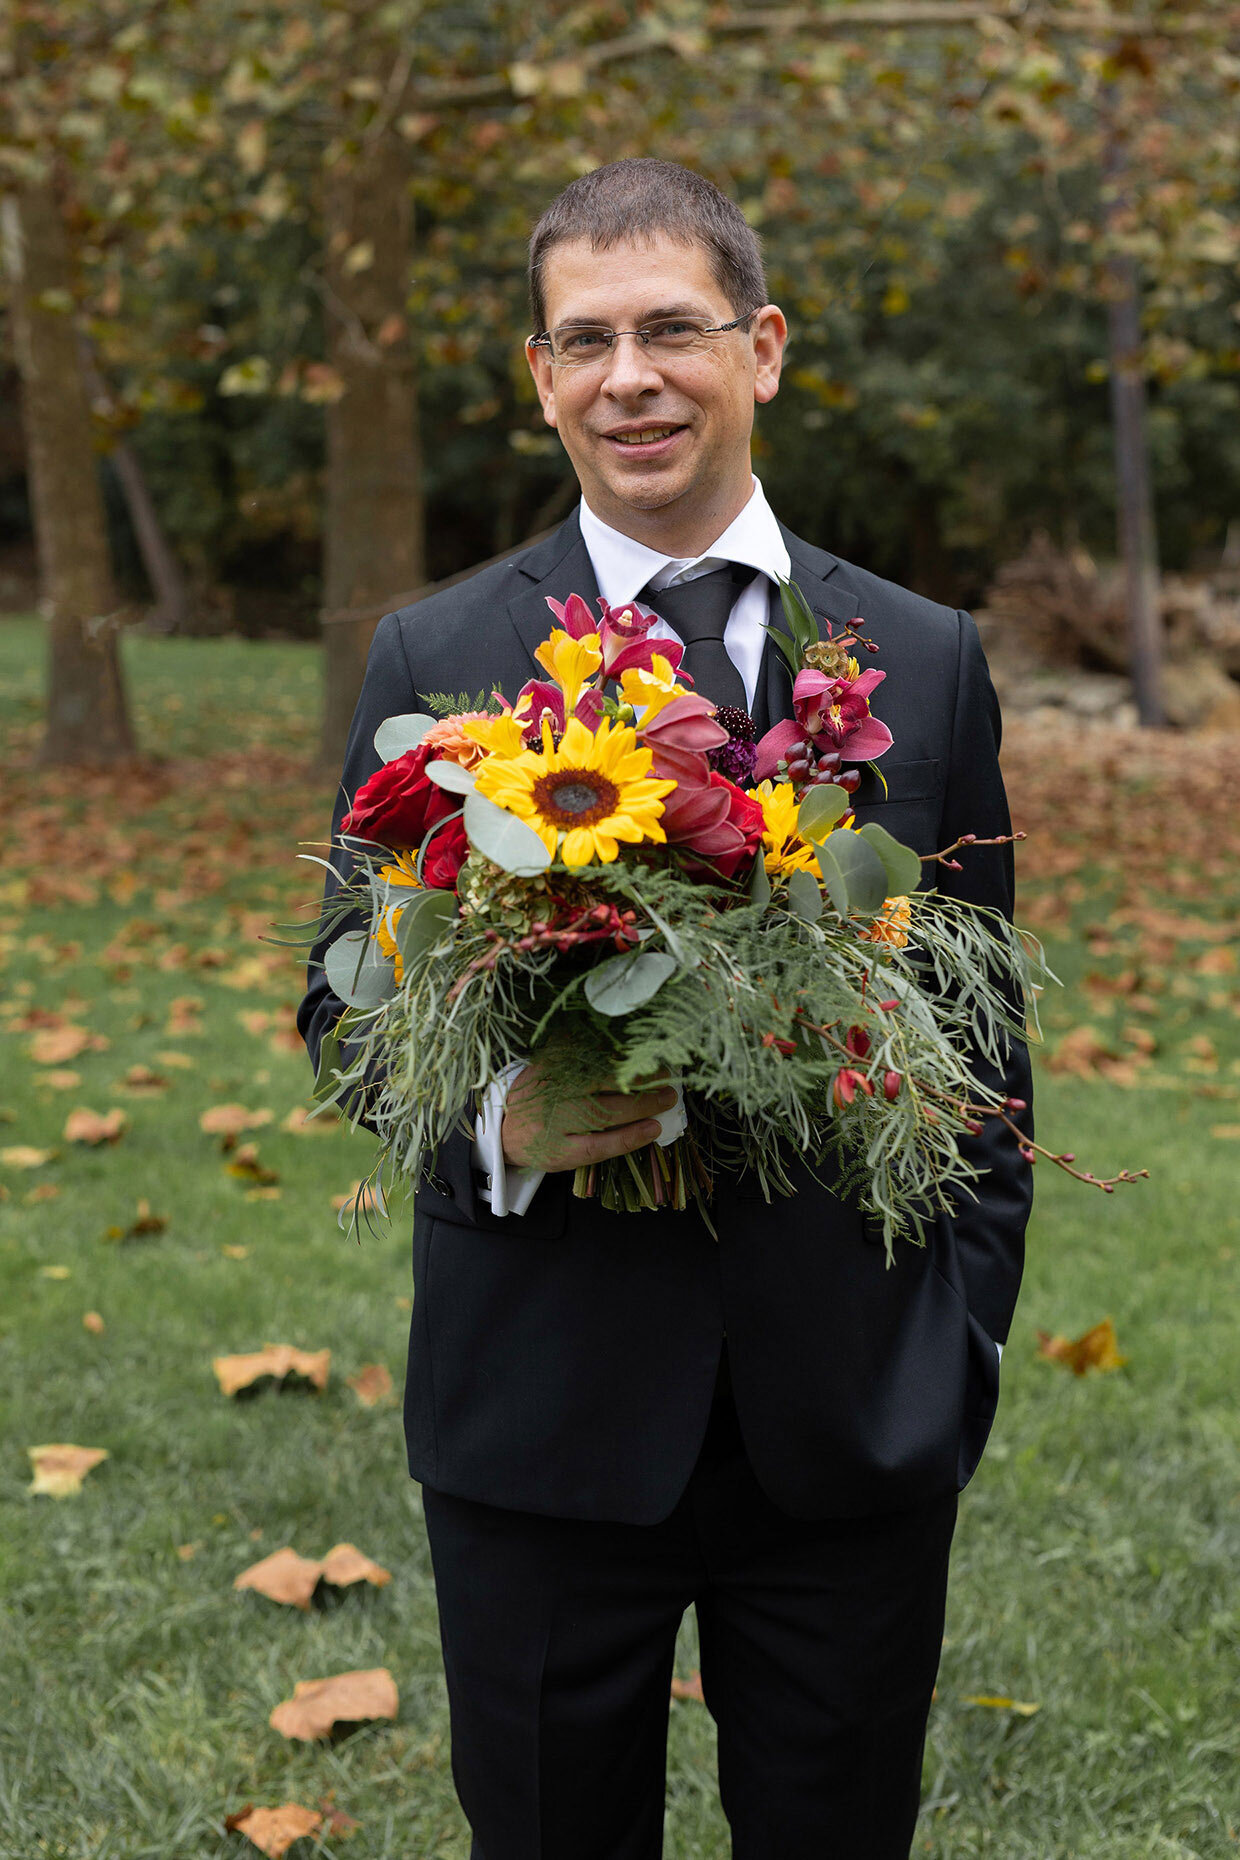 Groom holding bouquet of sunflowers for bride